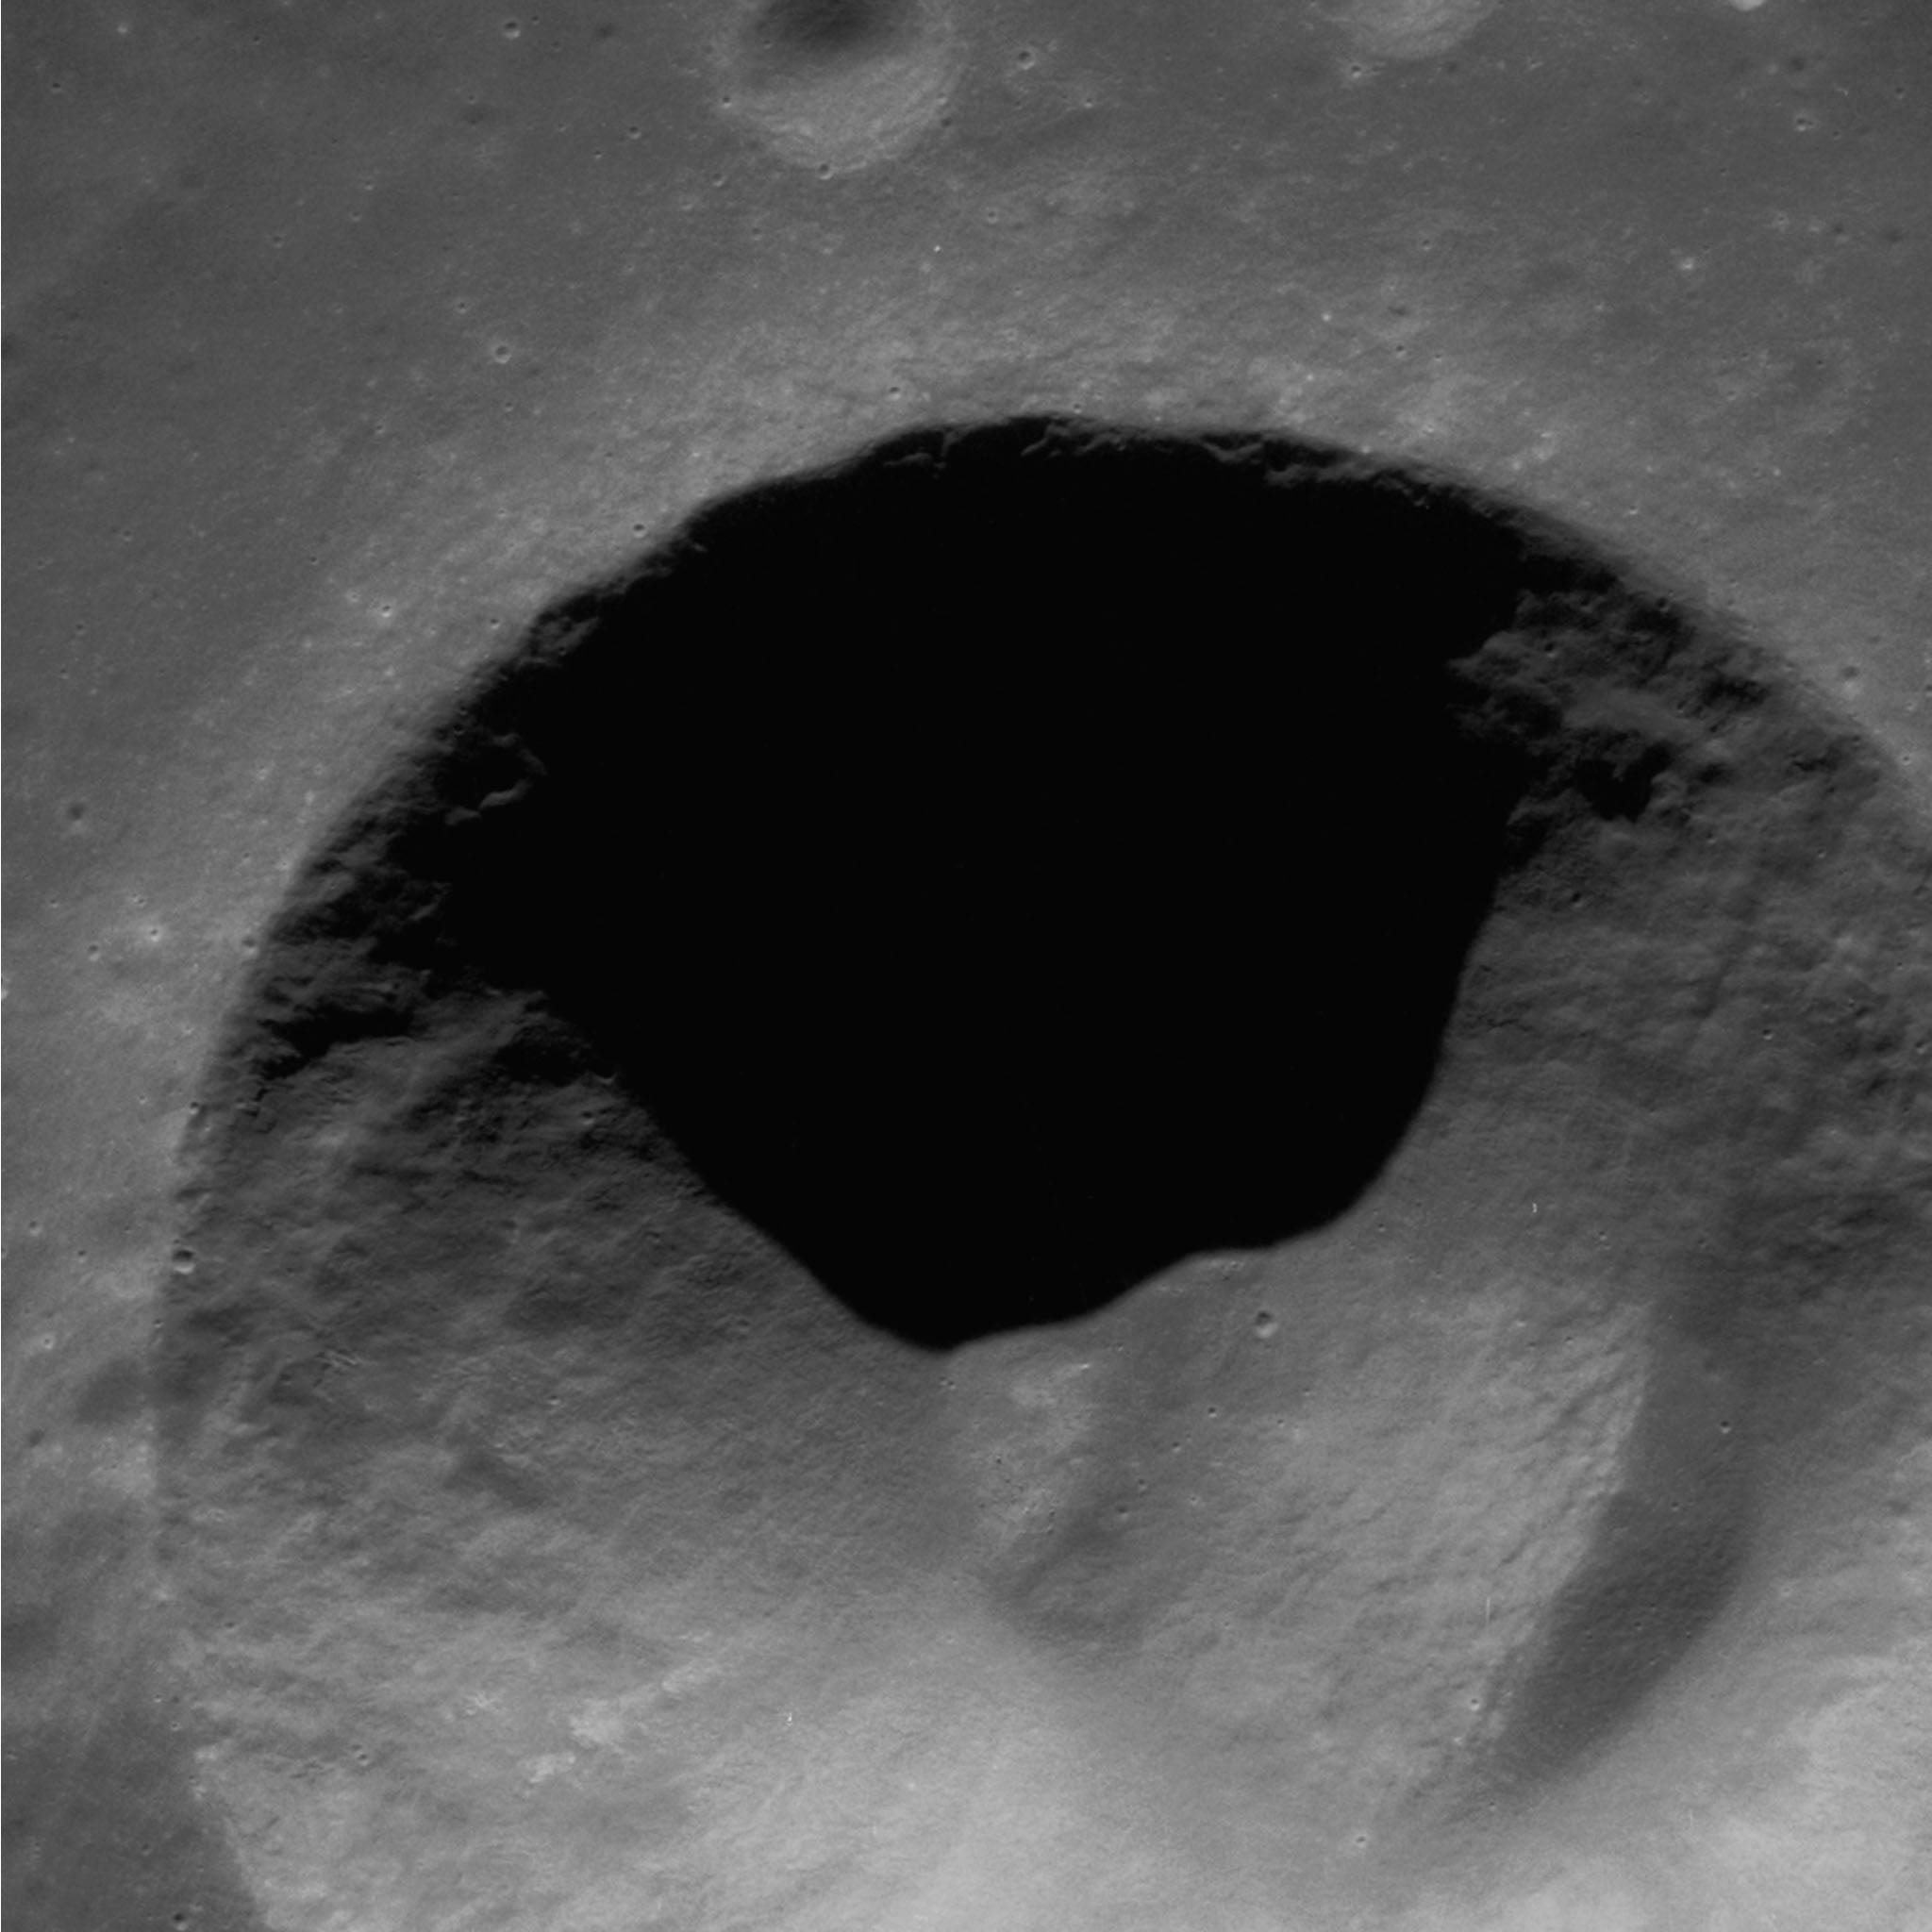 Anville Crater